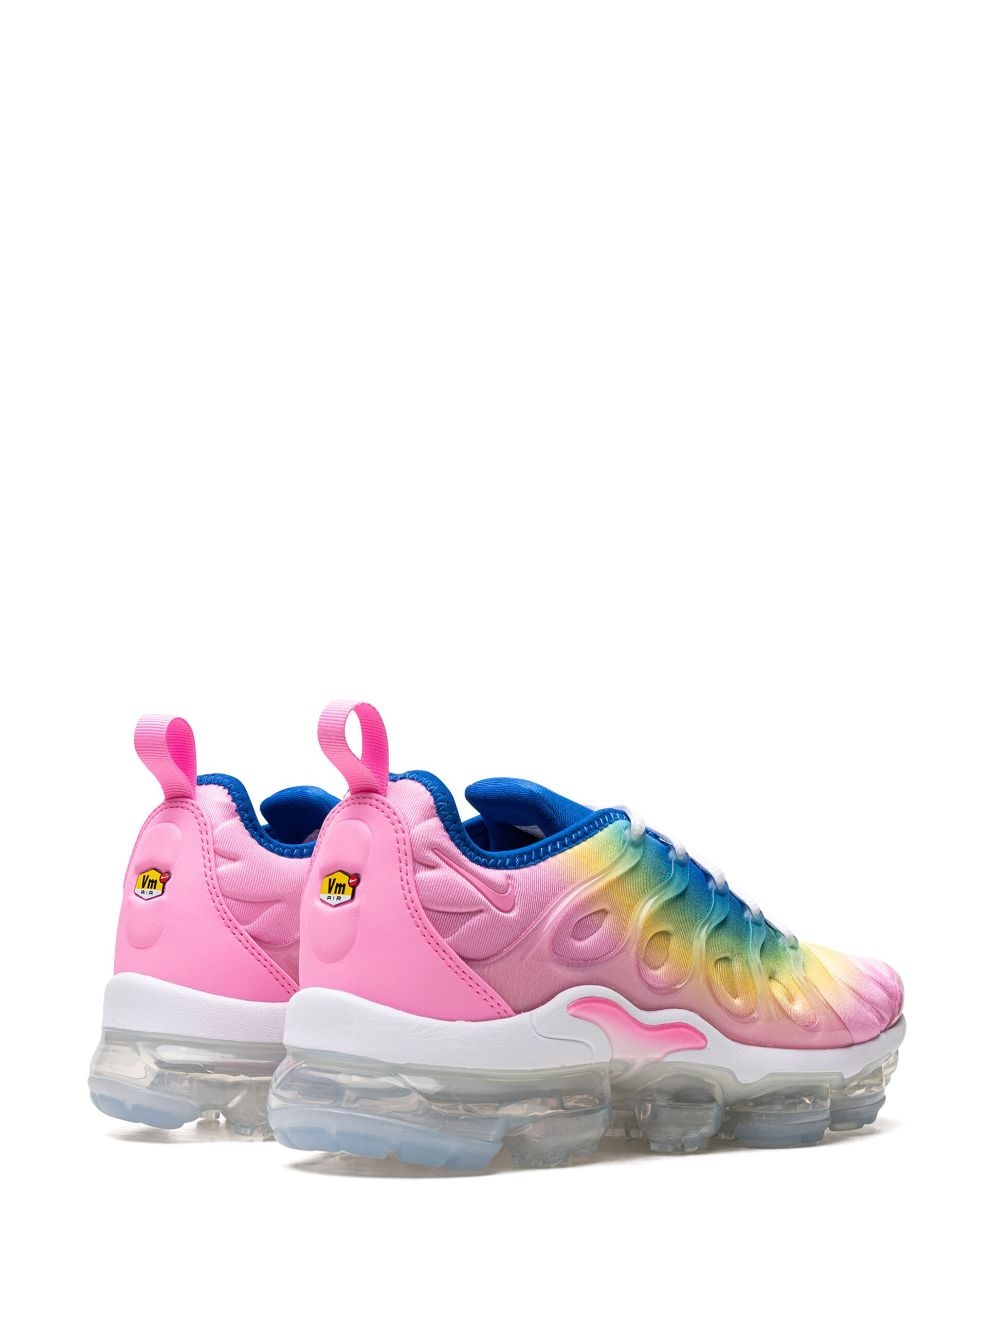 Air VaporMax Plus "Cotton Candy Rainbow" sneakers - 3